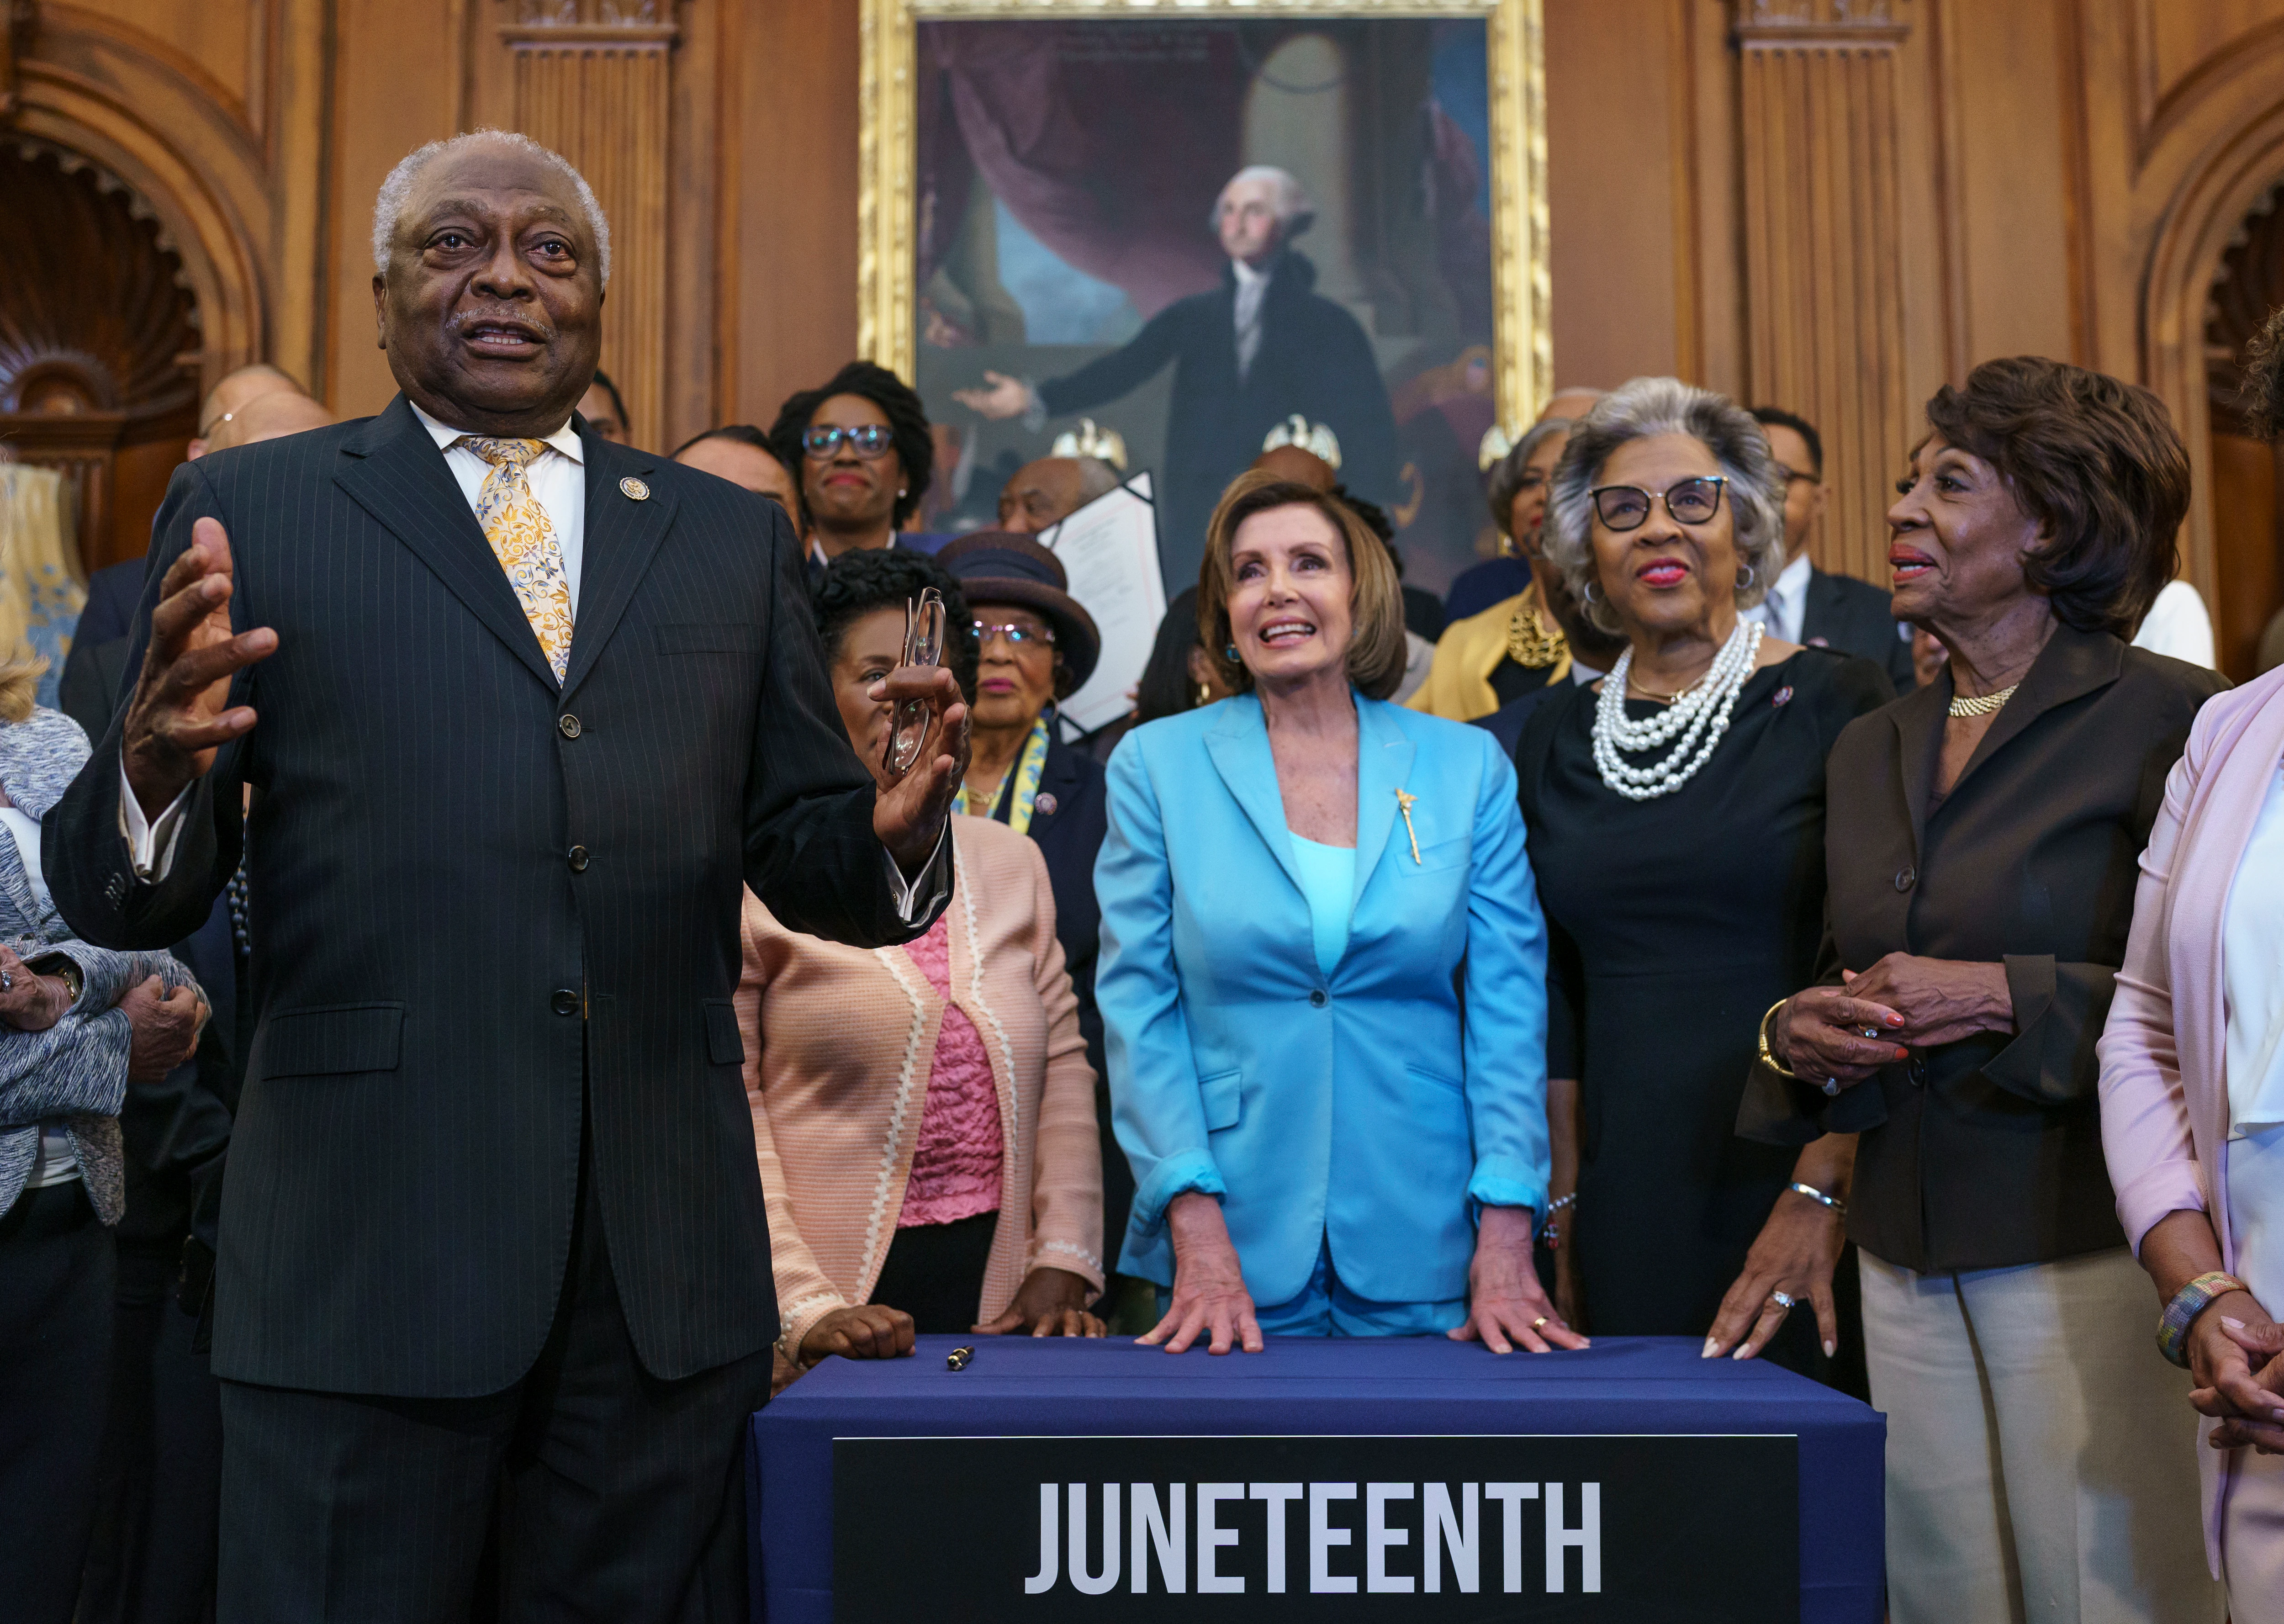 Biden Signs Into Law Creation of Juneteenth Holiday | Voice of America